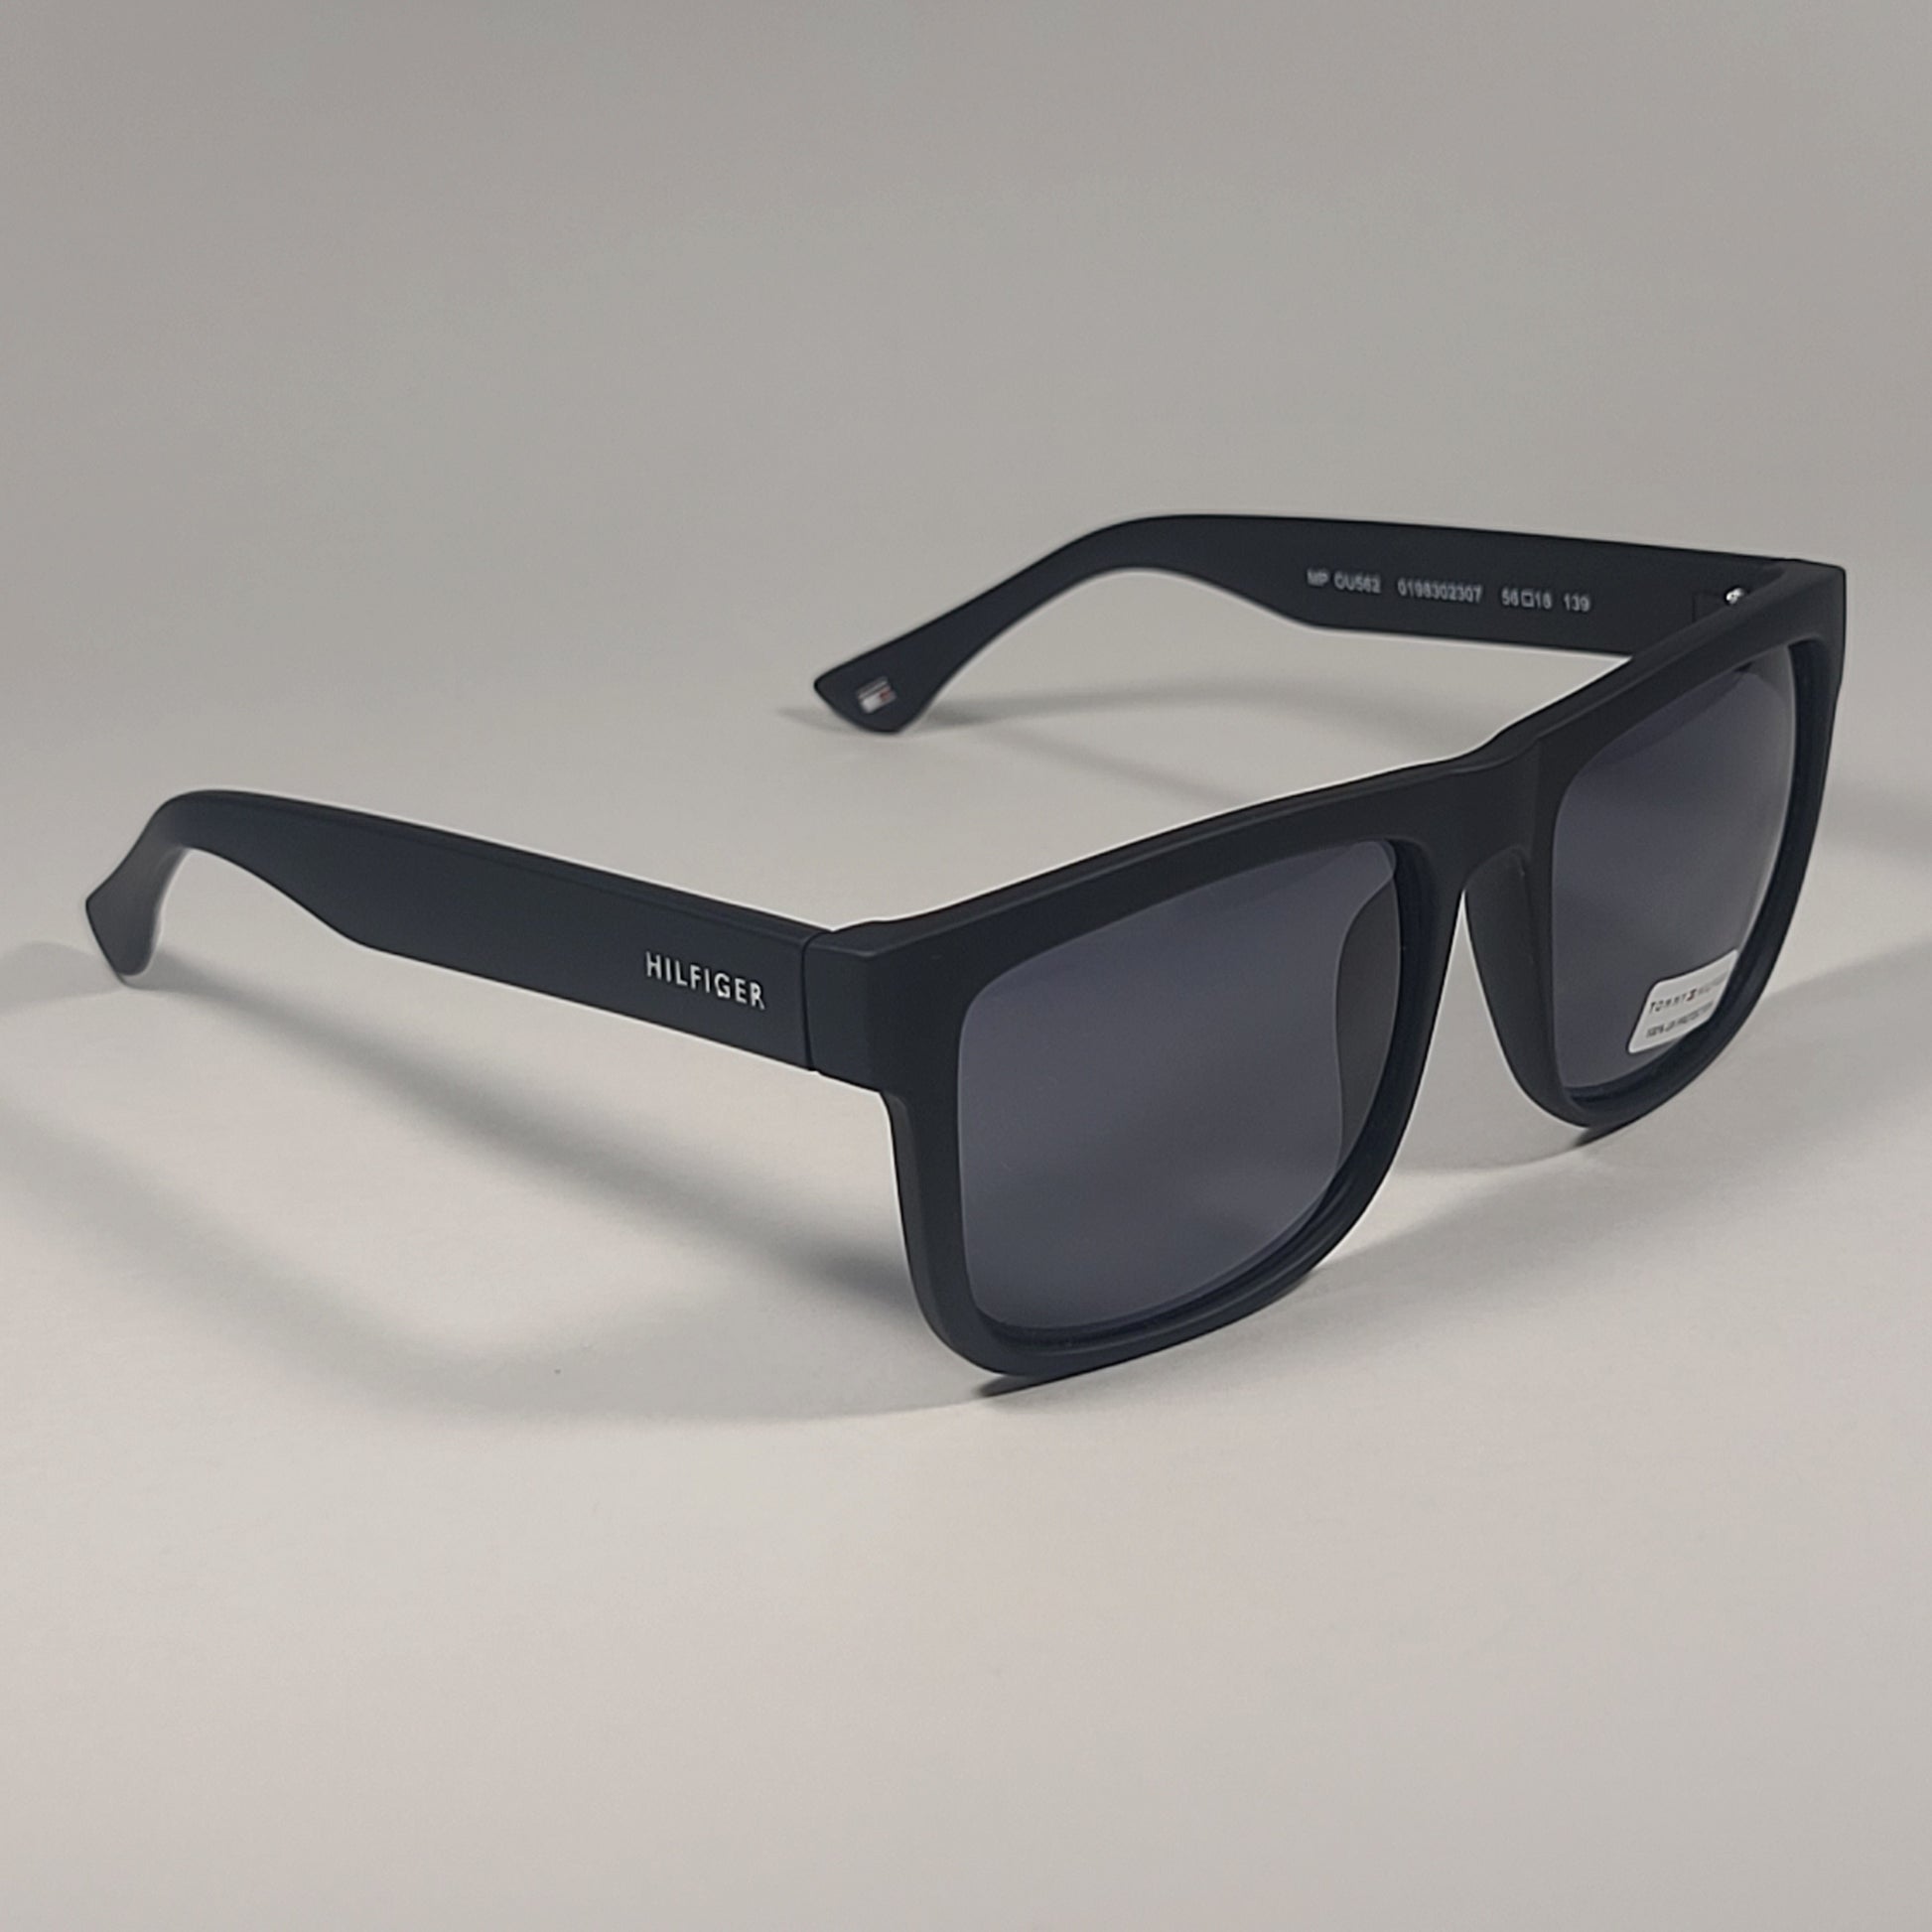 Tommy Hilfiger Wolf Square Sunglasses Matte Black Gray Tinted Lens WOLF MP OU562 - Sunglasses